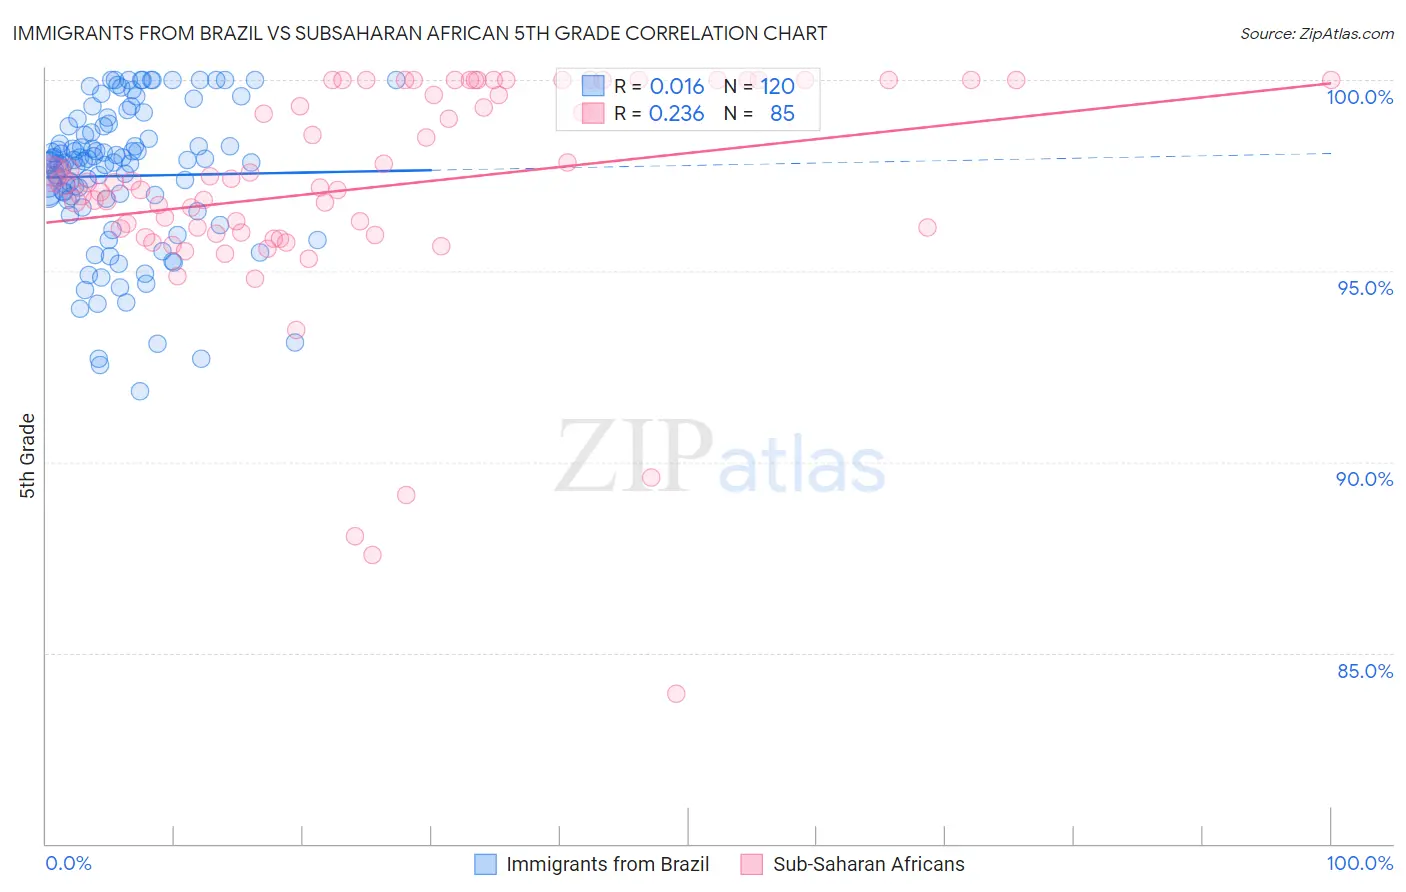 Immigrants from Brazil vs Subsaharan African 5th Grade